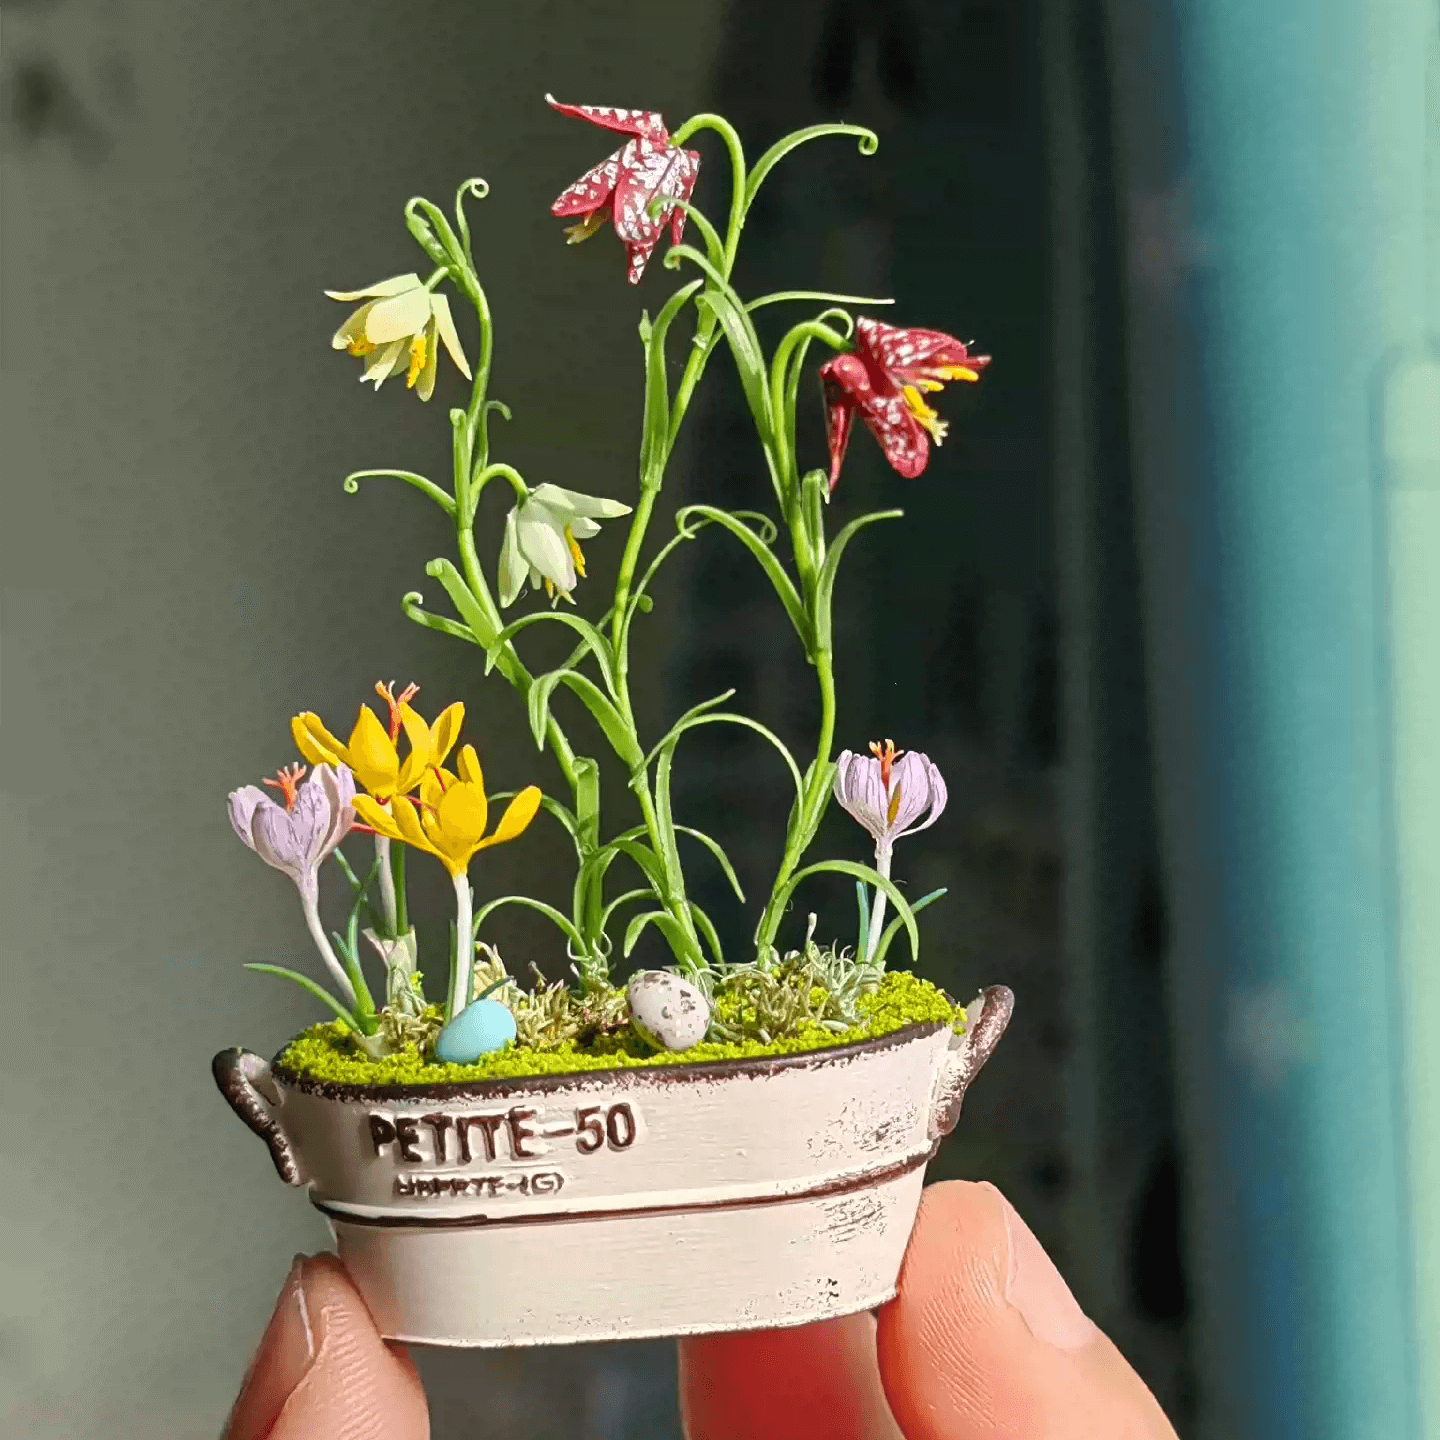 Fritillarias flower from mid to late spring and are perennial.  Crocus is a wonderful bulb to plant underneath trees or in a landscape bed.  Fritillaria thunbergii, Fritillaria meleagris, Crocus sativus and bird's eggs in clay planter.  Material: Handmade from Clay